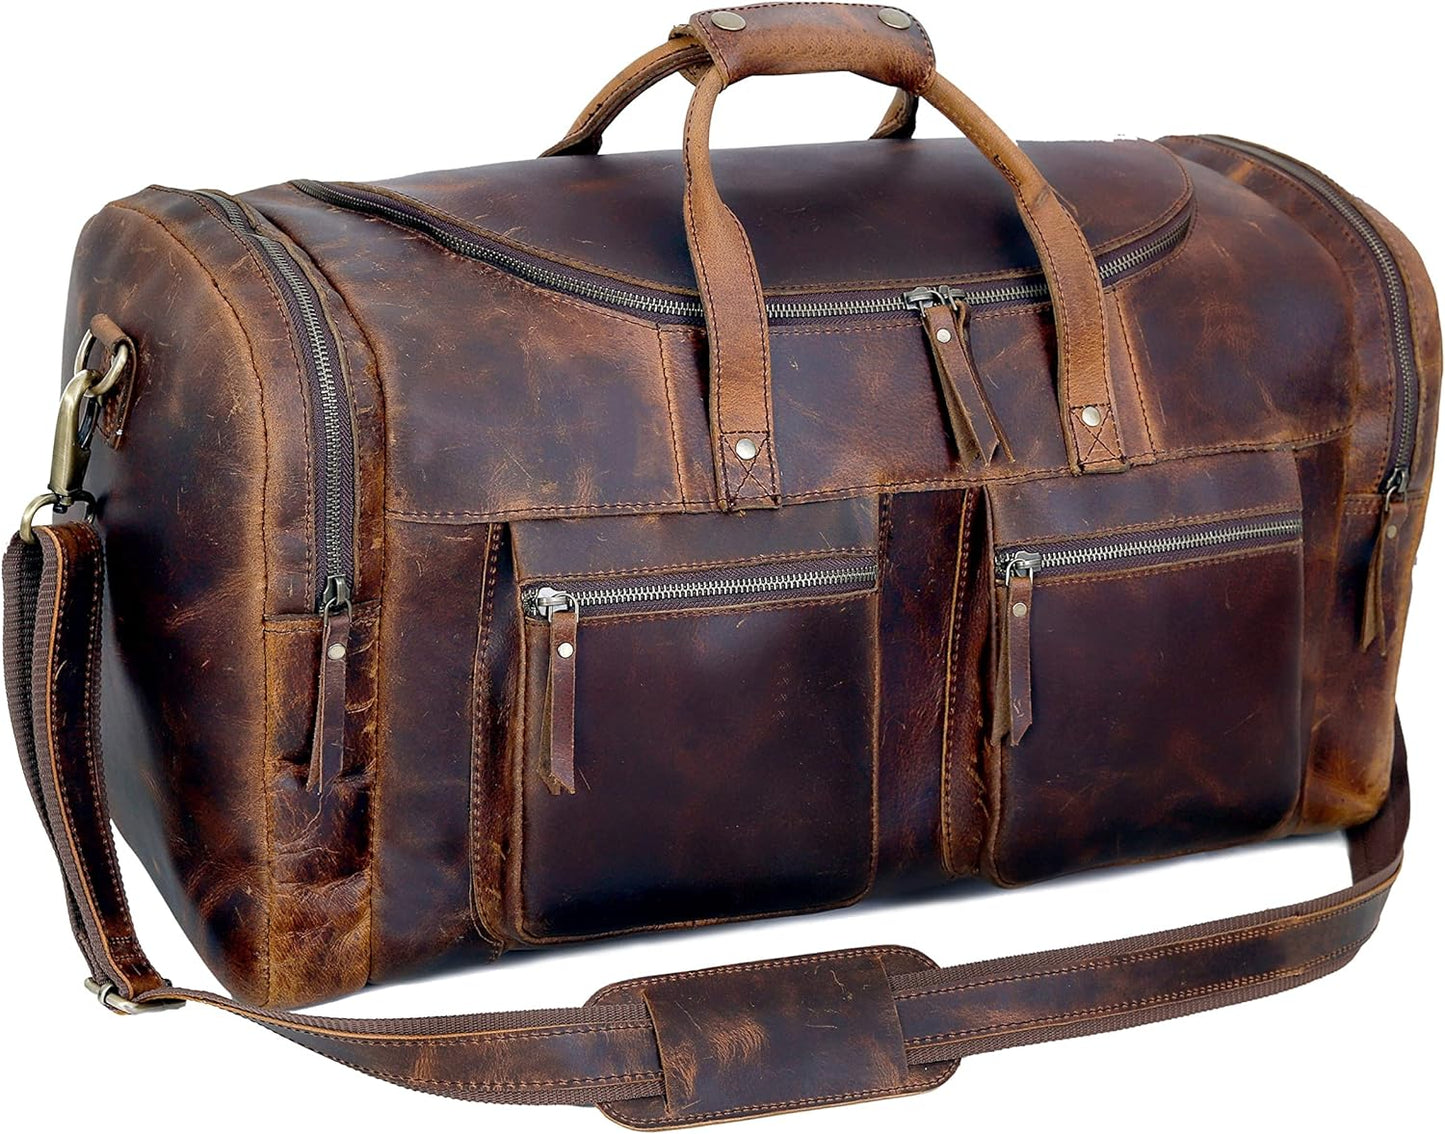 Duffel Vintage Classic Style with Modern Outlook Overnight Luggage Bag